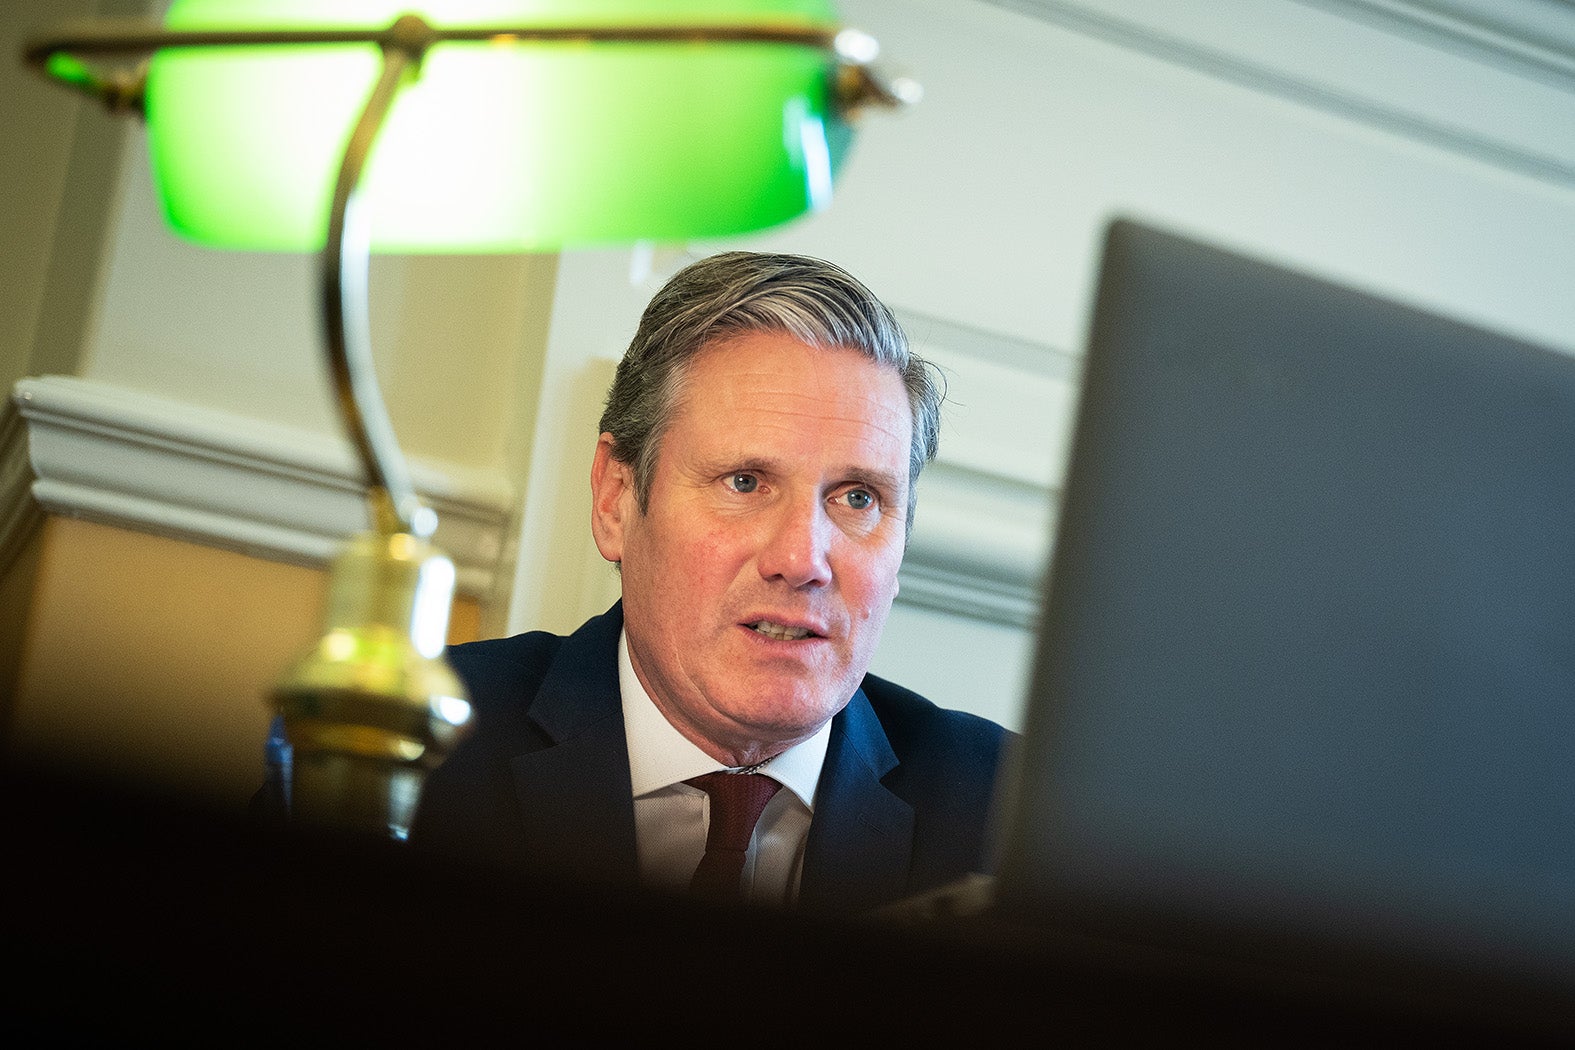 Keir Starmer remains the Tories’ useful idiot